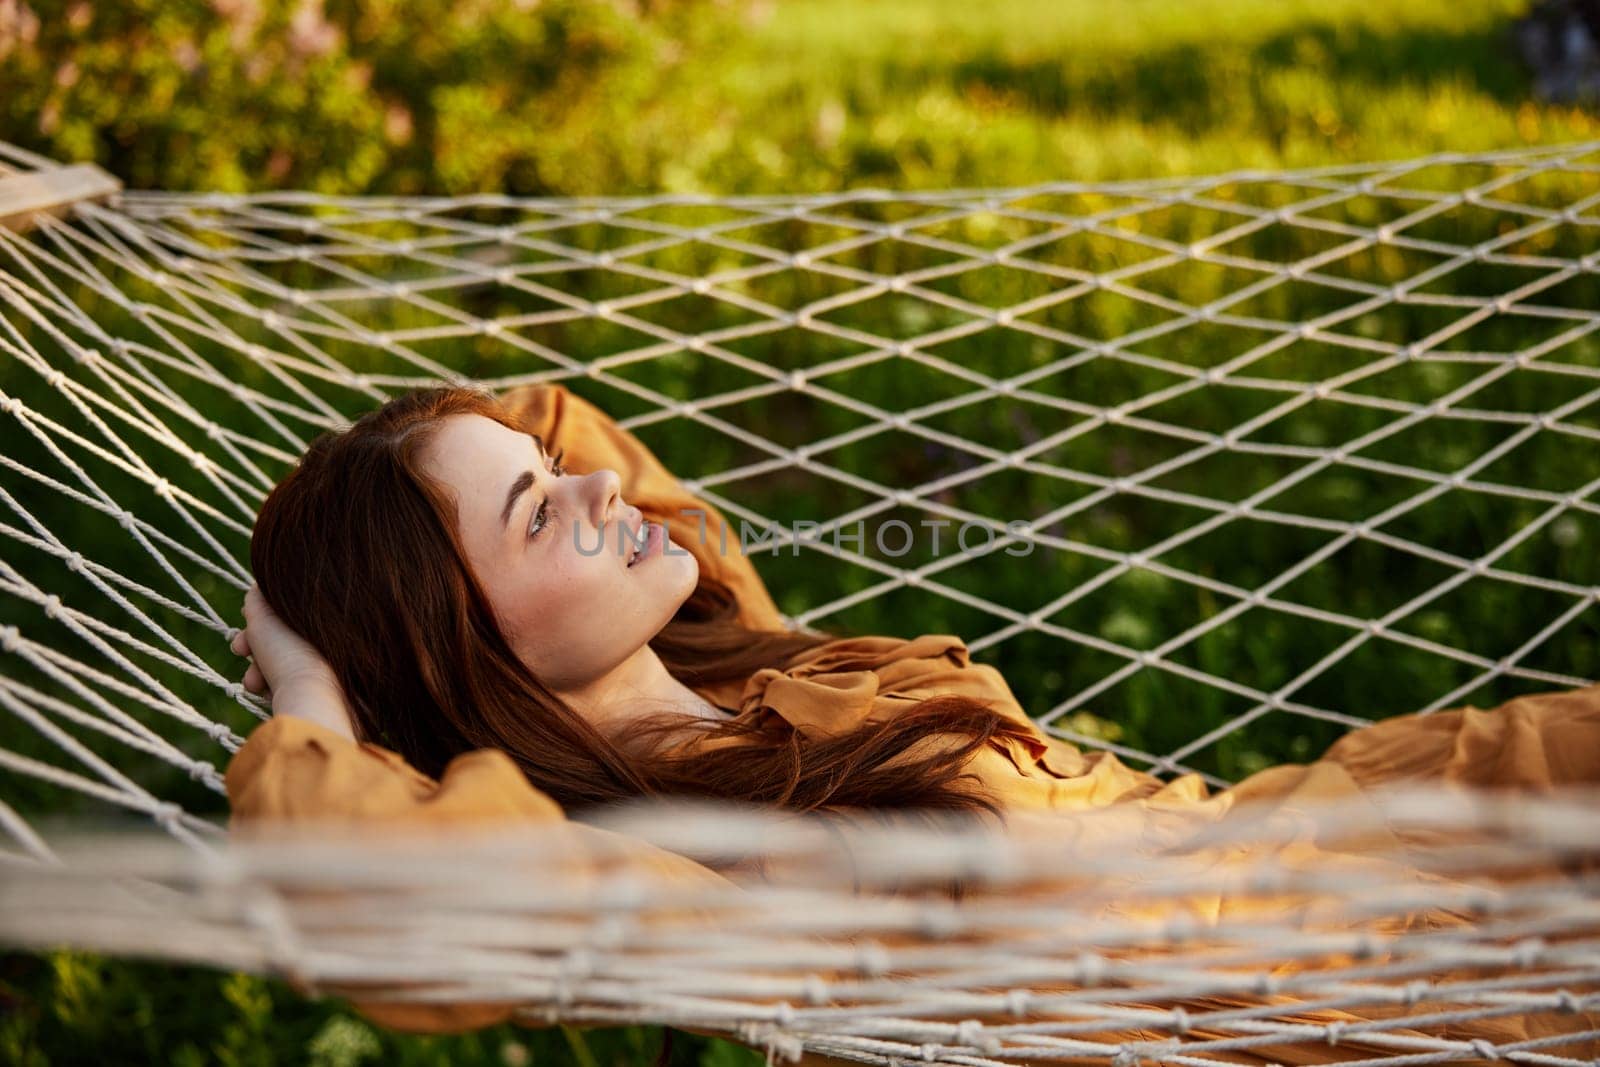 a woman is resting lying in a mesh hammock with her hands behind her head, smiling happily, enjoying a warm day in the rays of the setting sun, lying in an orange dress. High quality photo